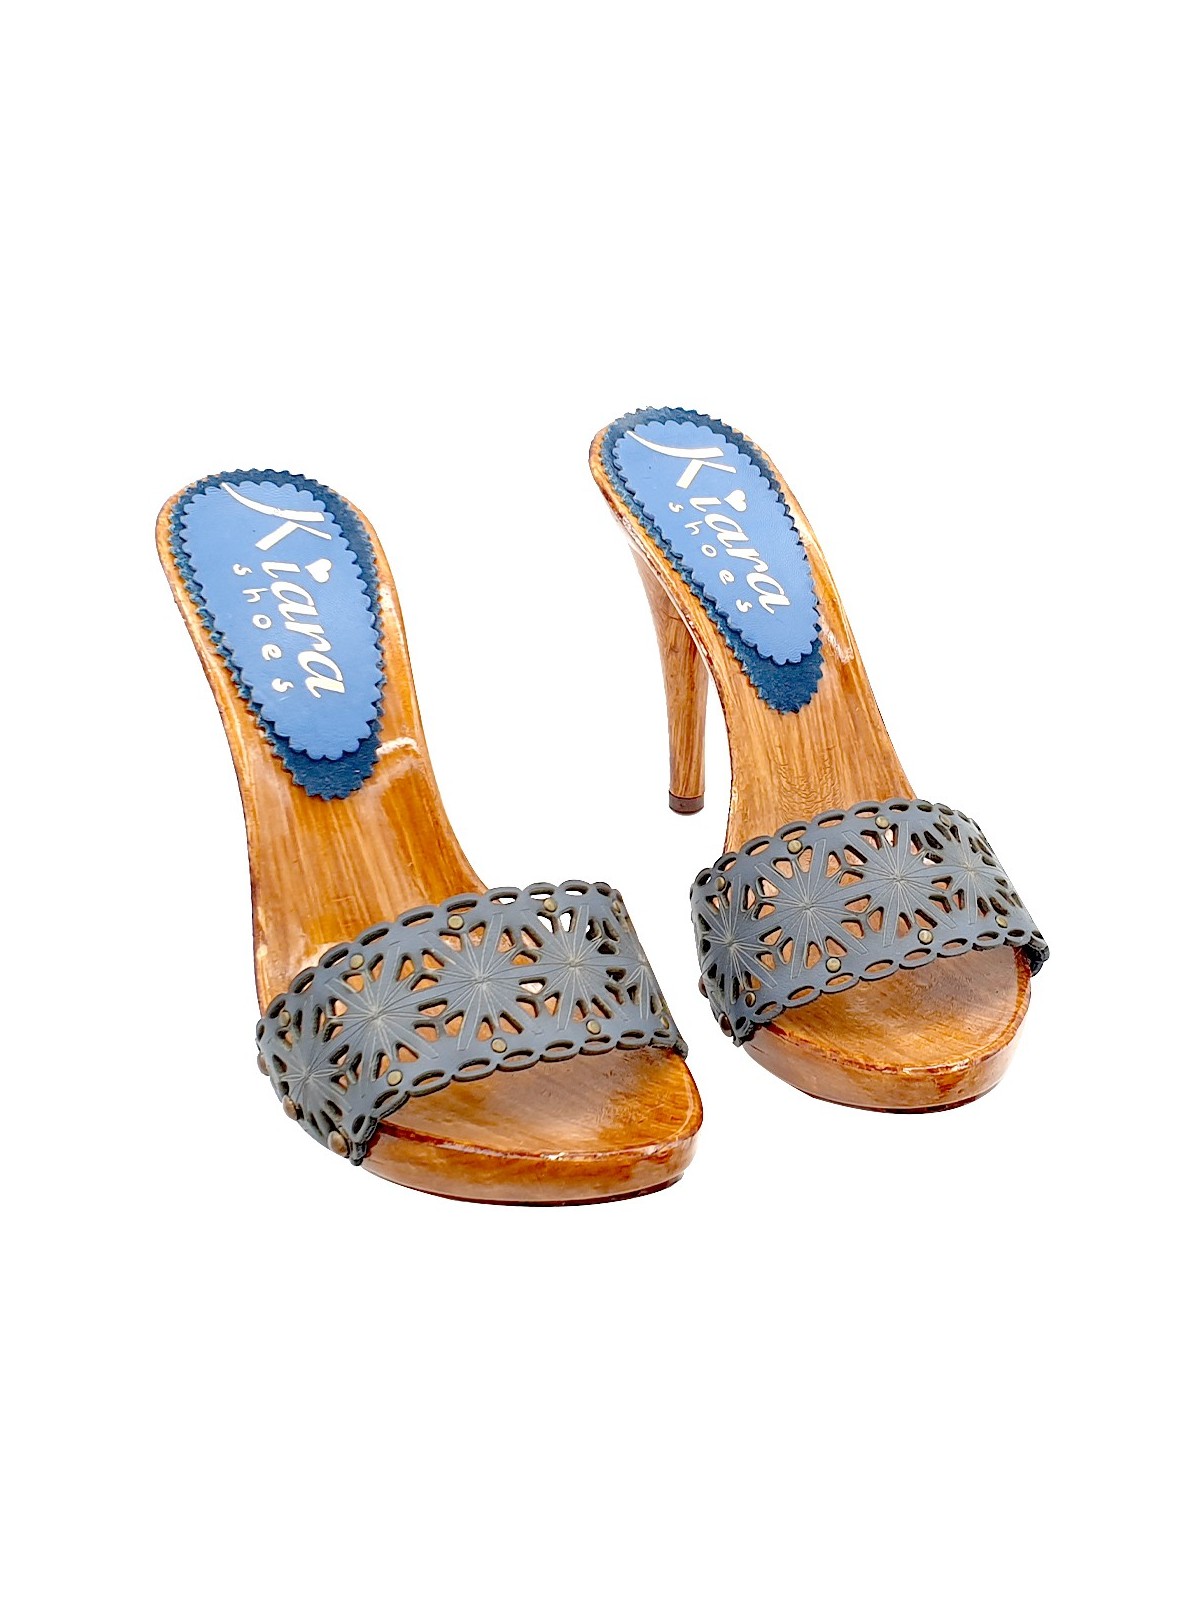 CLOGS IN BLUE LASERED LEATHER AND HIGH HEEL